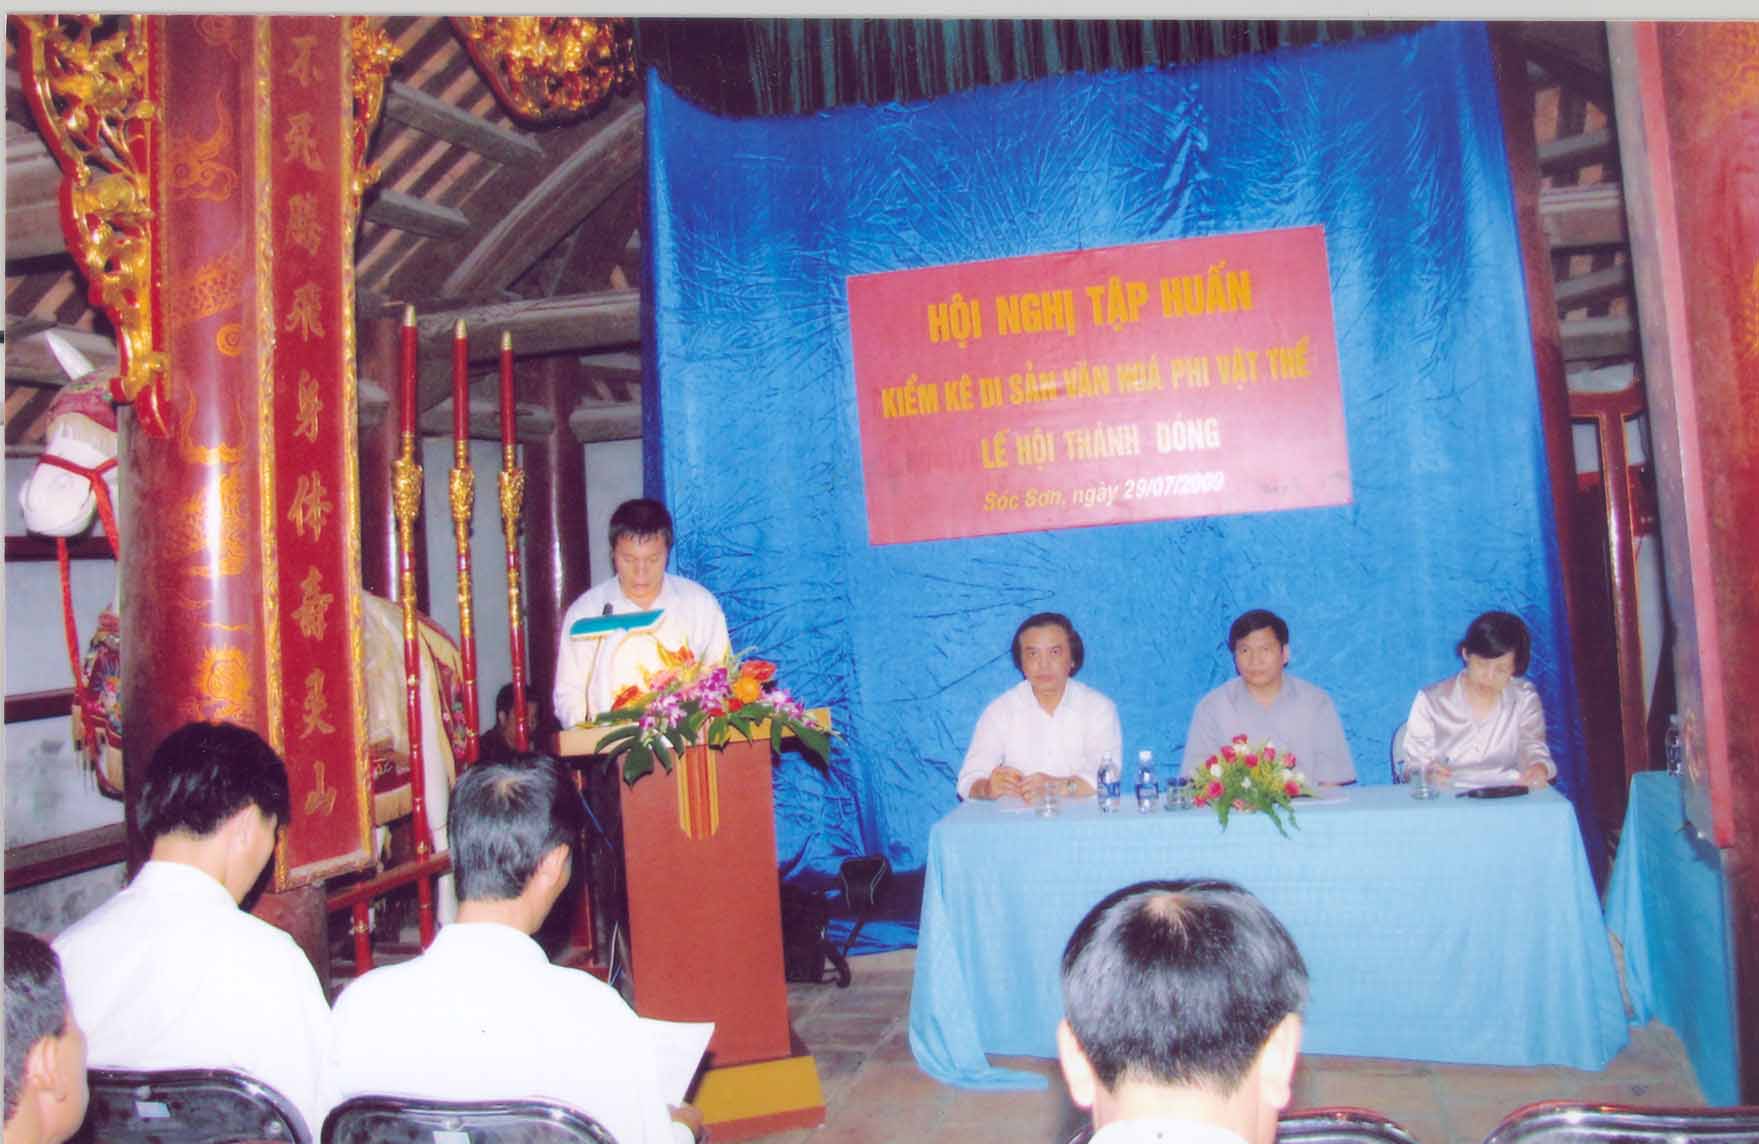 Photograhper Nguyễn Thu Hường, 2009. © Vietnam Institute of Culture and Arts Studies.